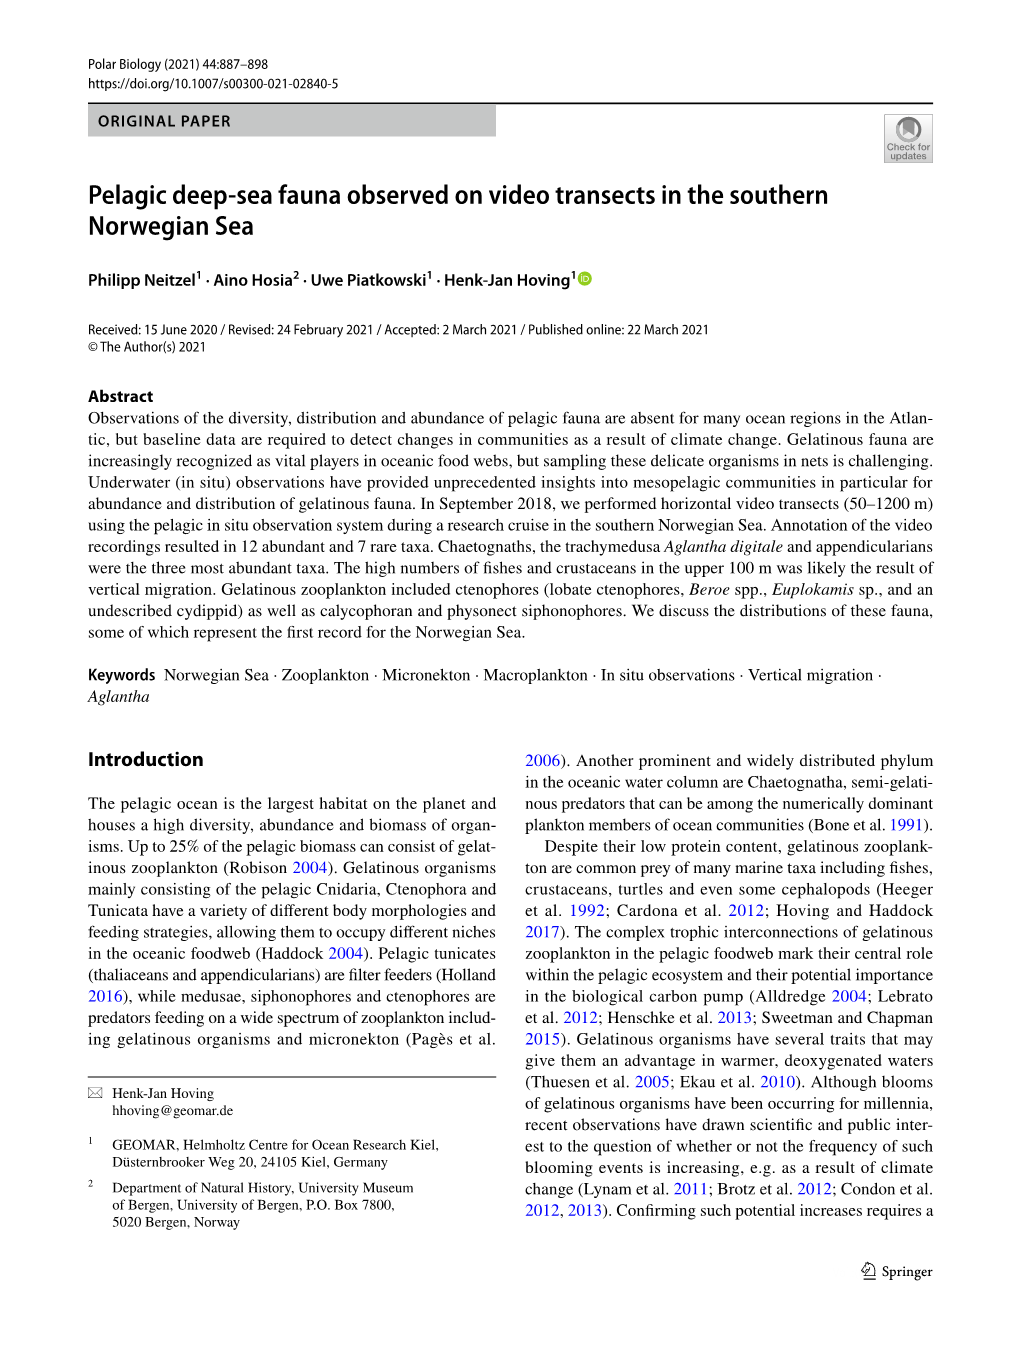 Pelagic Deep-Sea Fauna Observed on Video Transects in The